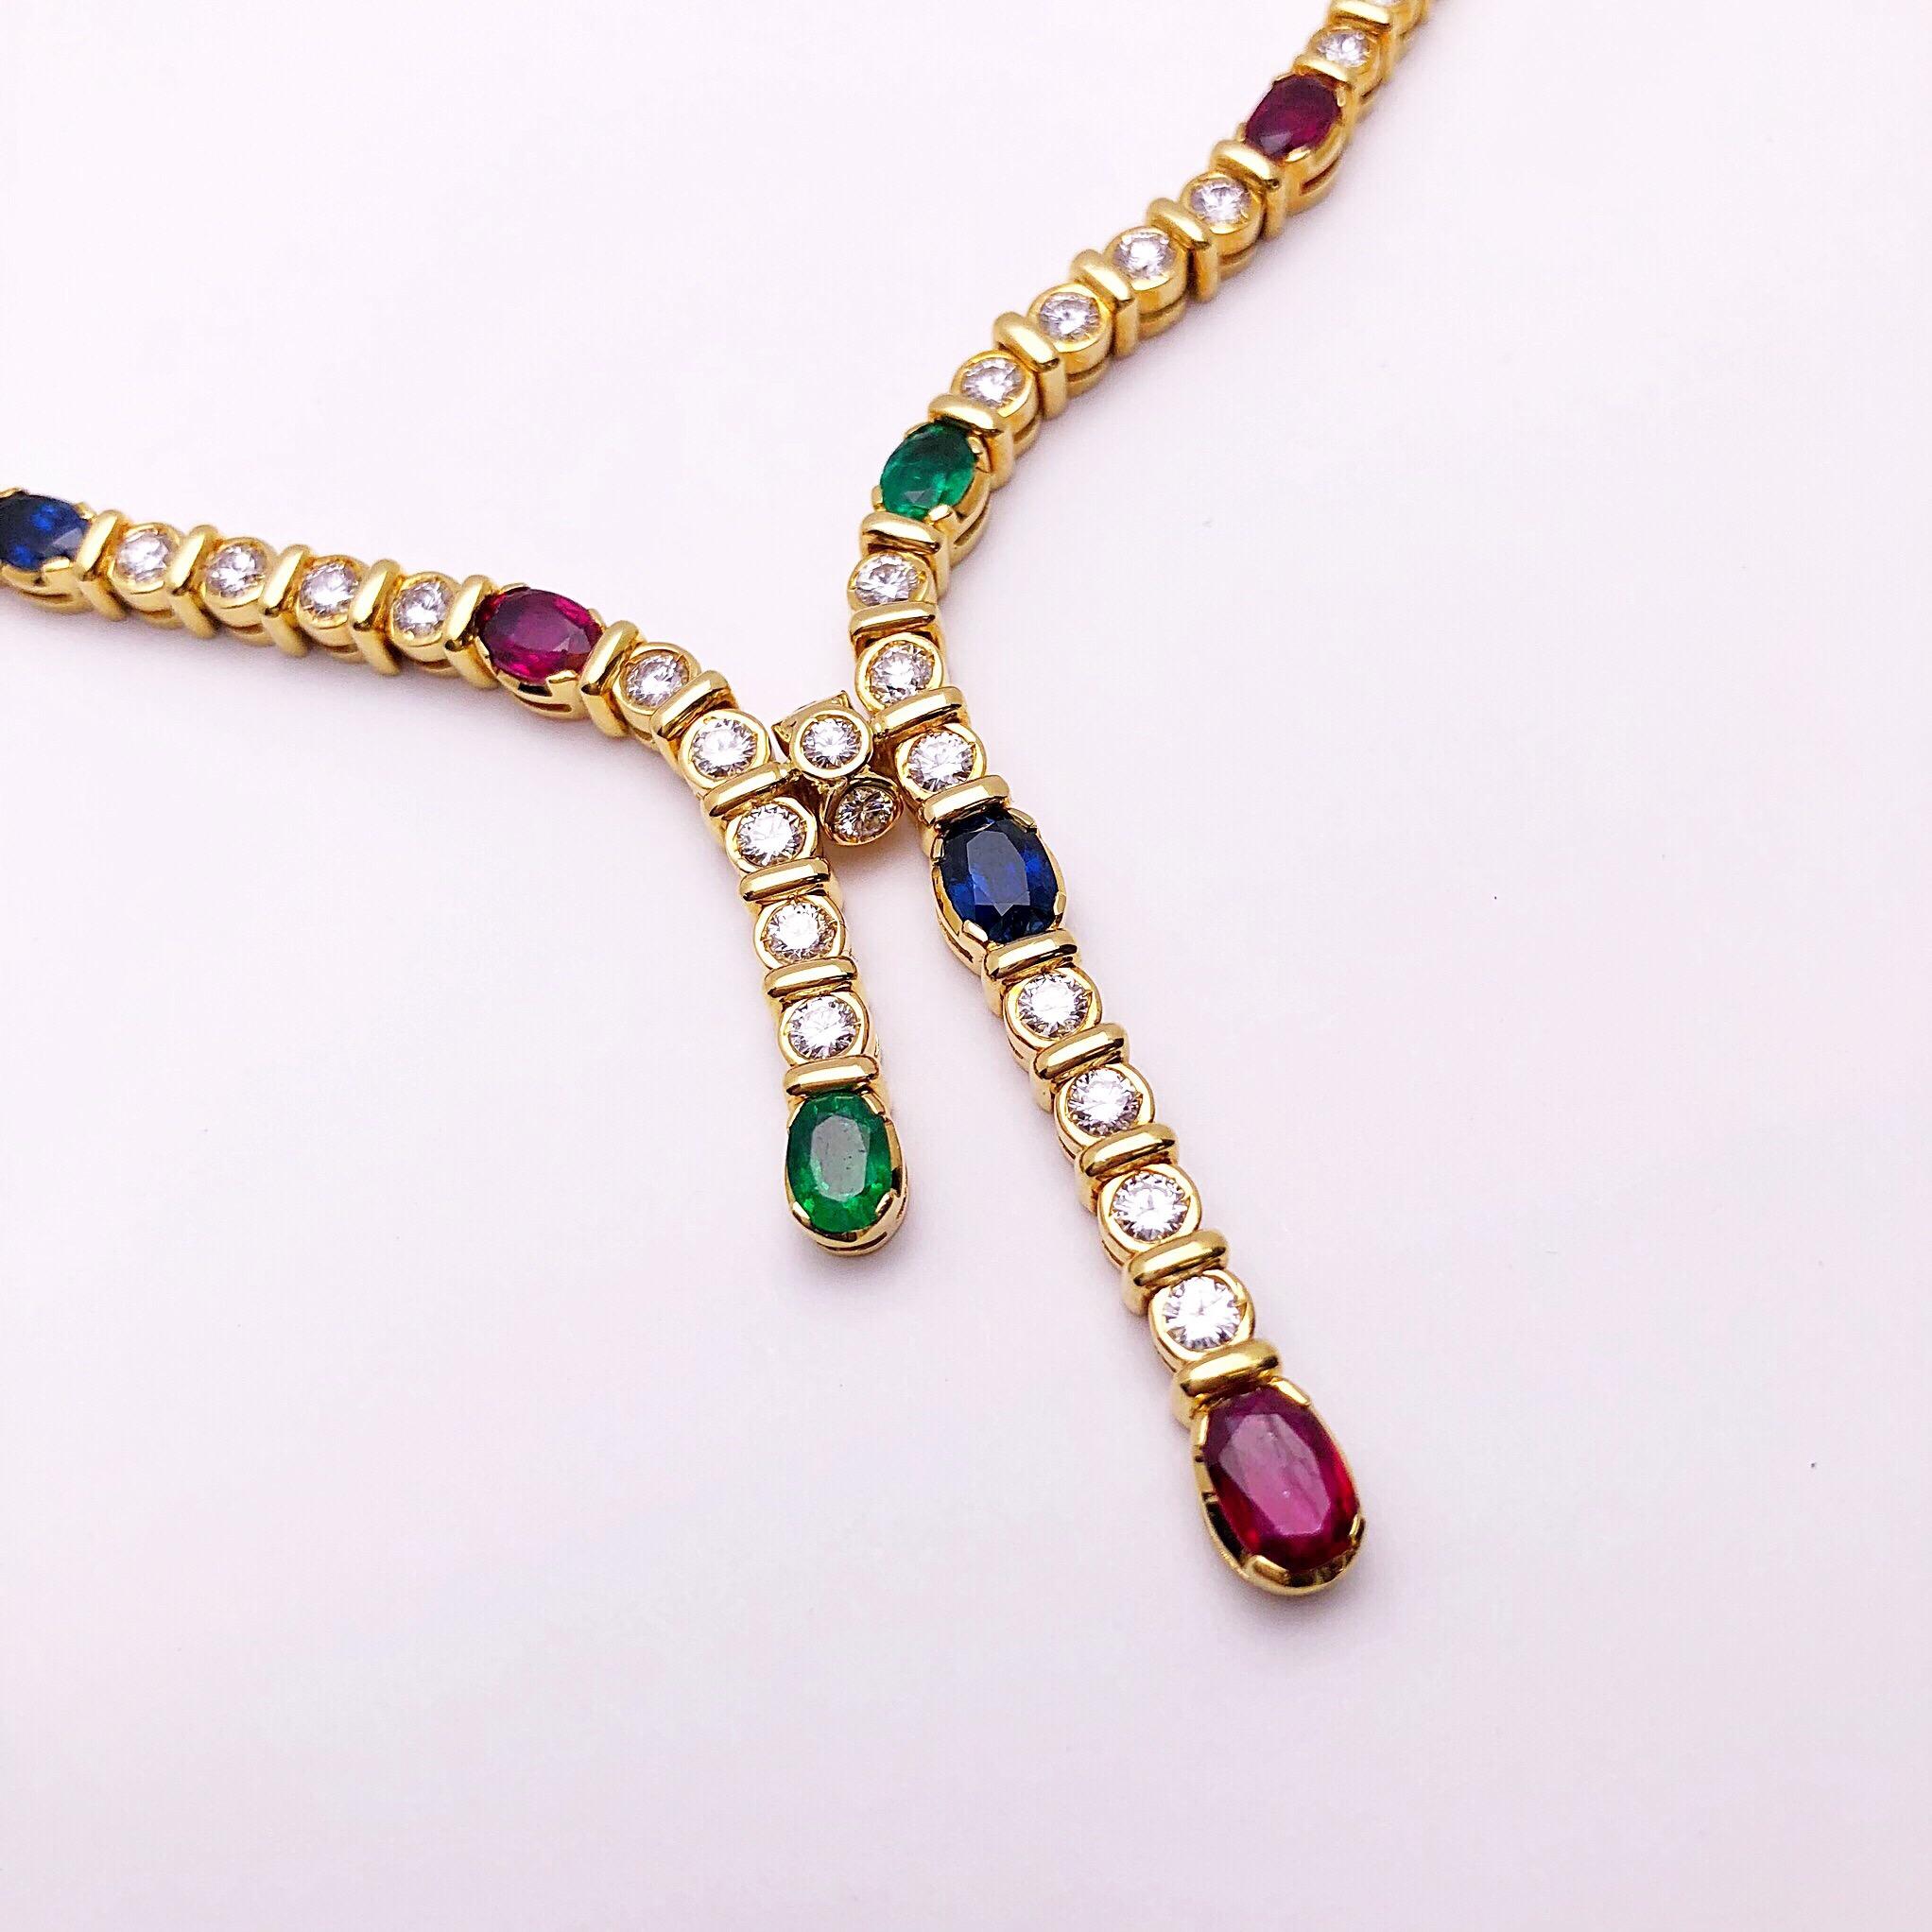 Round white brilliant diamonds alternating with oval rubies, emeralds and sapphires makeup the composition of this beautiful necklace. 
The 18 karat yellow gold necklace is bezel set, along with a lariat style, allowing the diamonds and gem stones